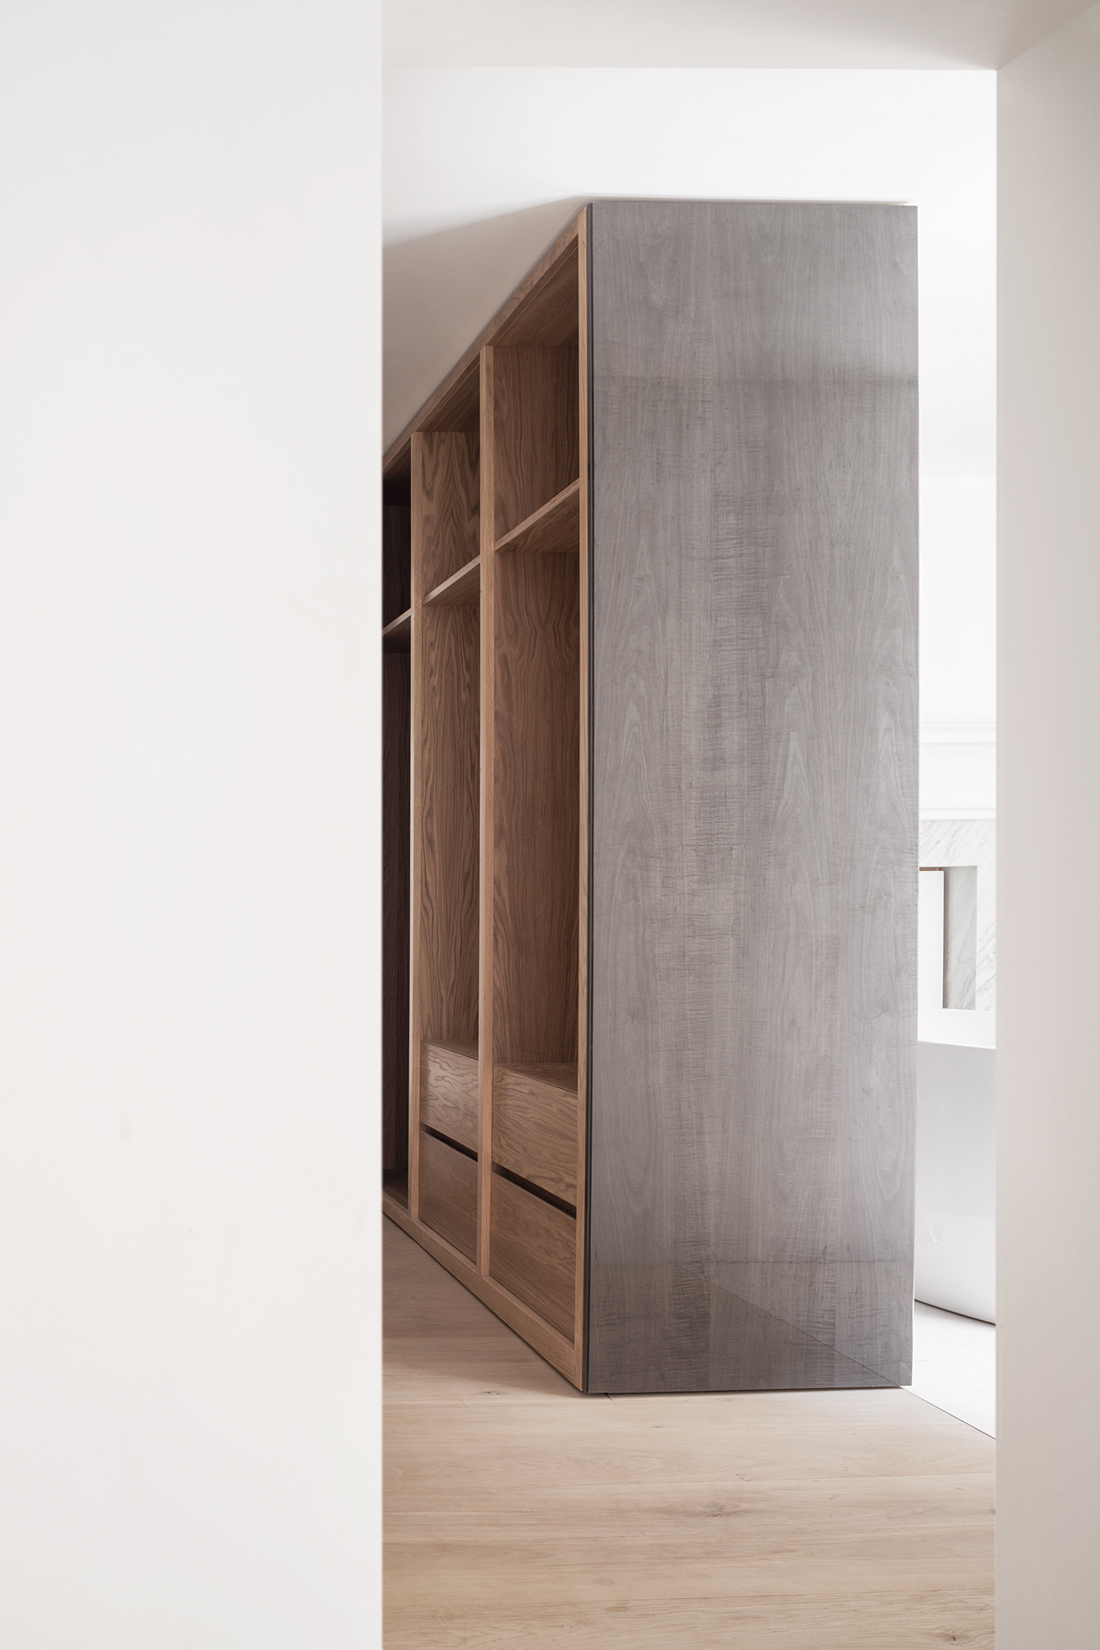 Custom Closet Design by HASA Architects | DPAGES